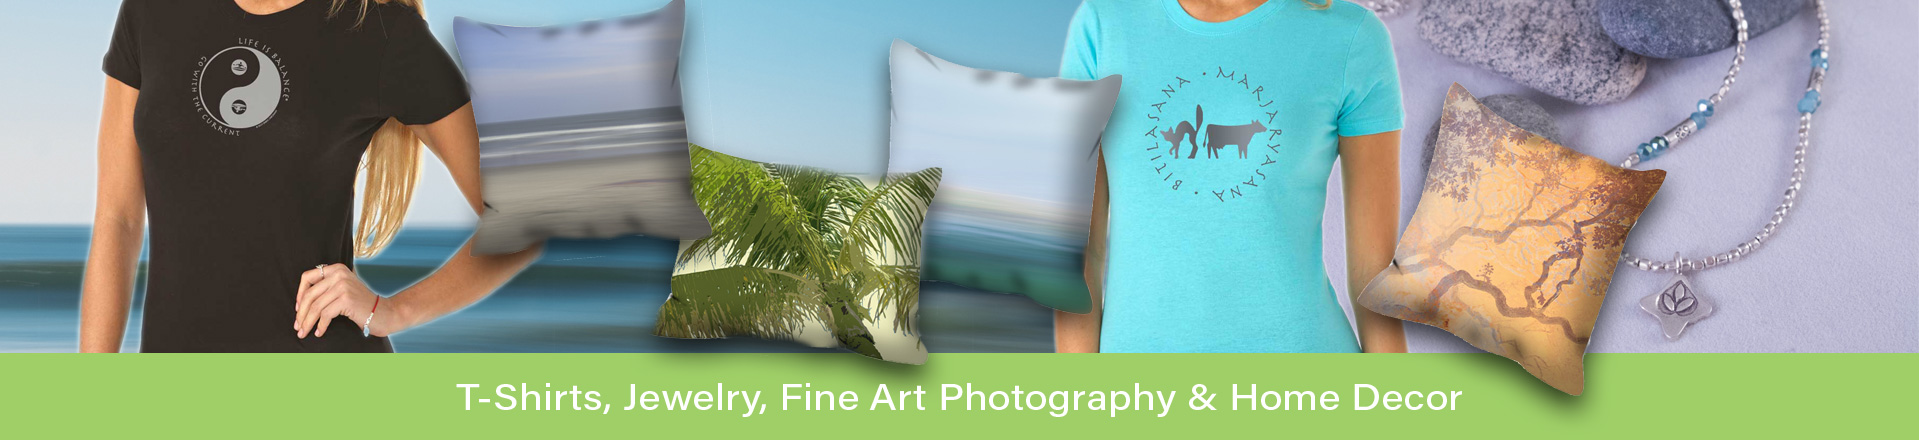 shop for t-shirts, jewelry, fine art photography and home decor